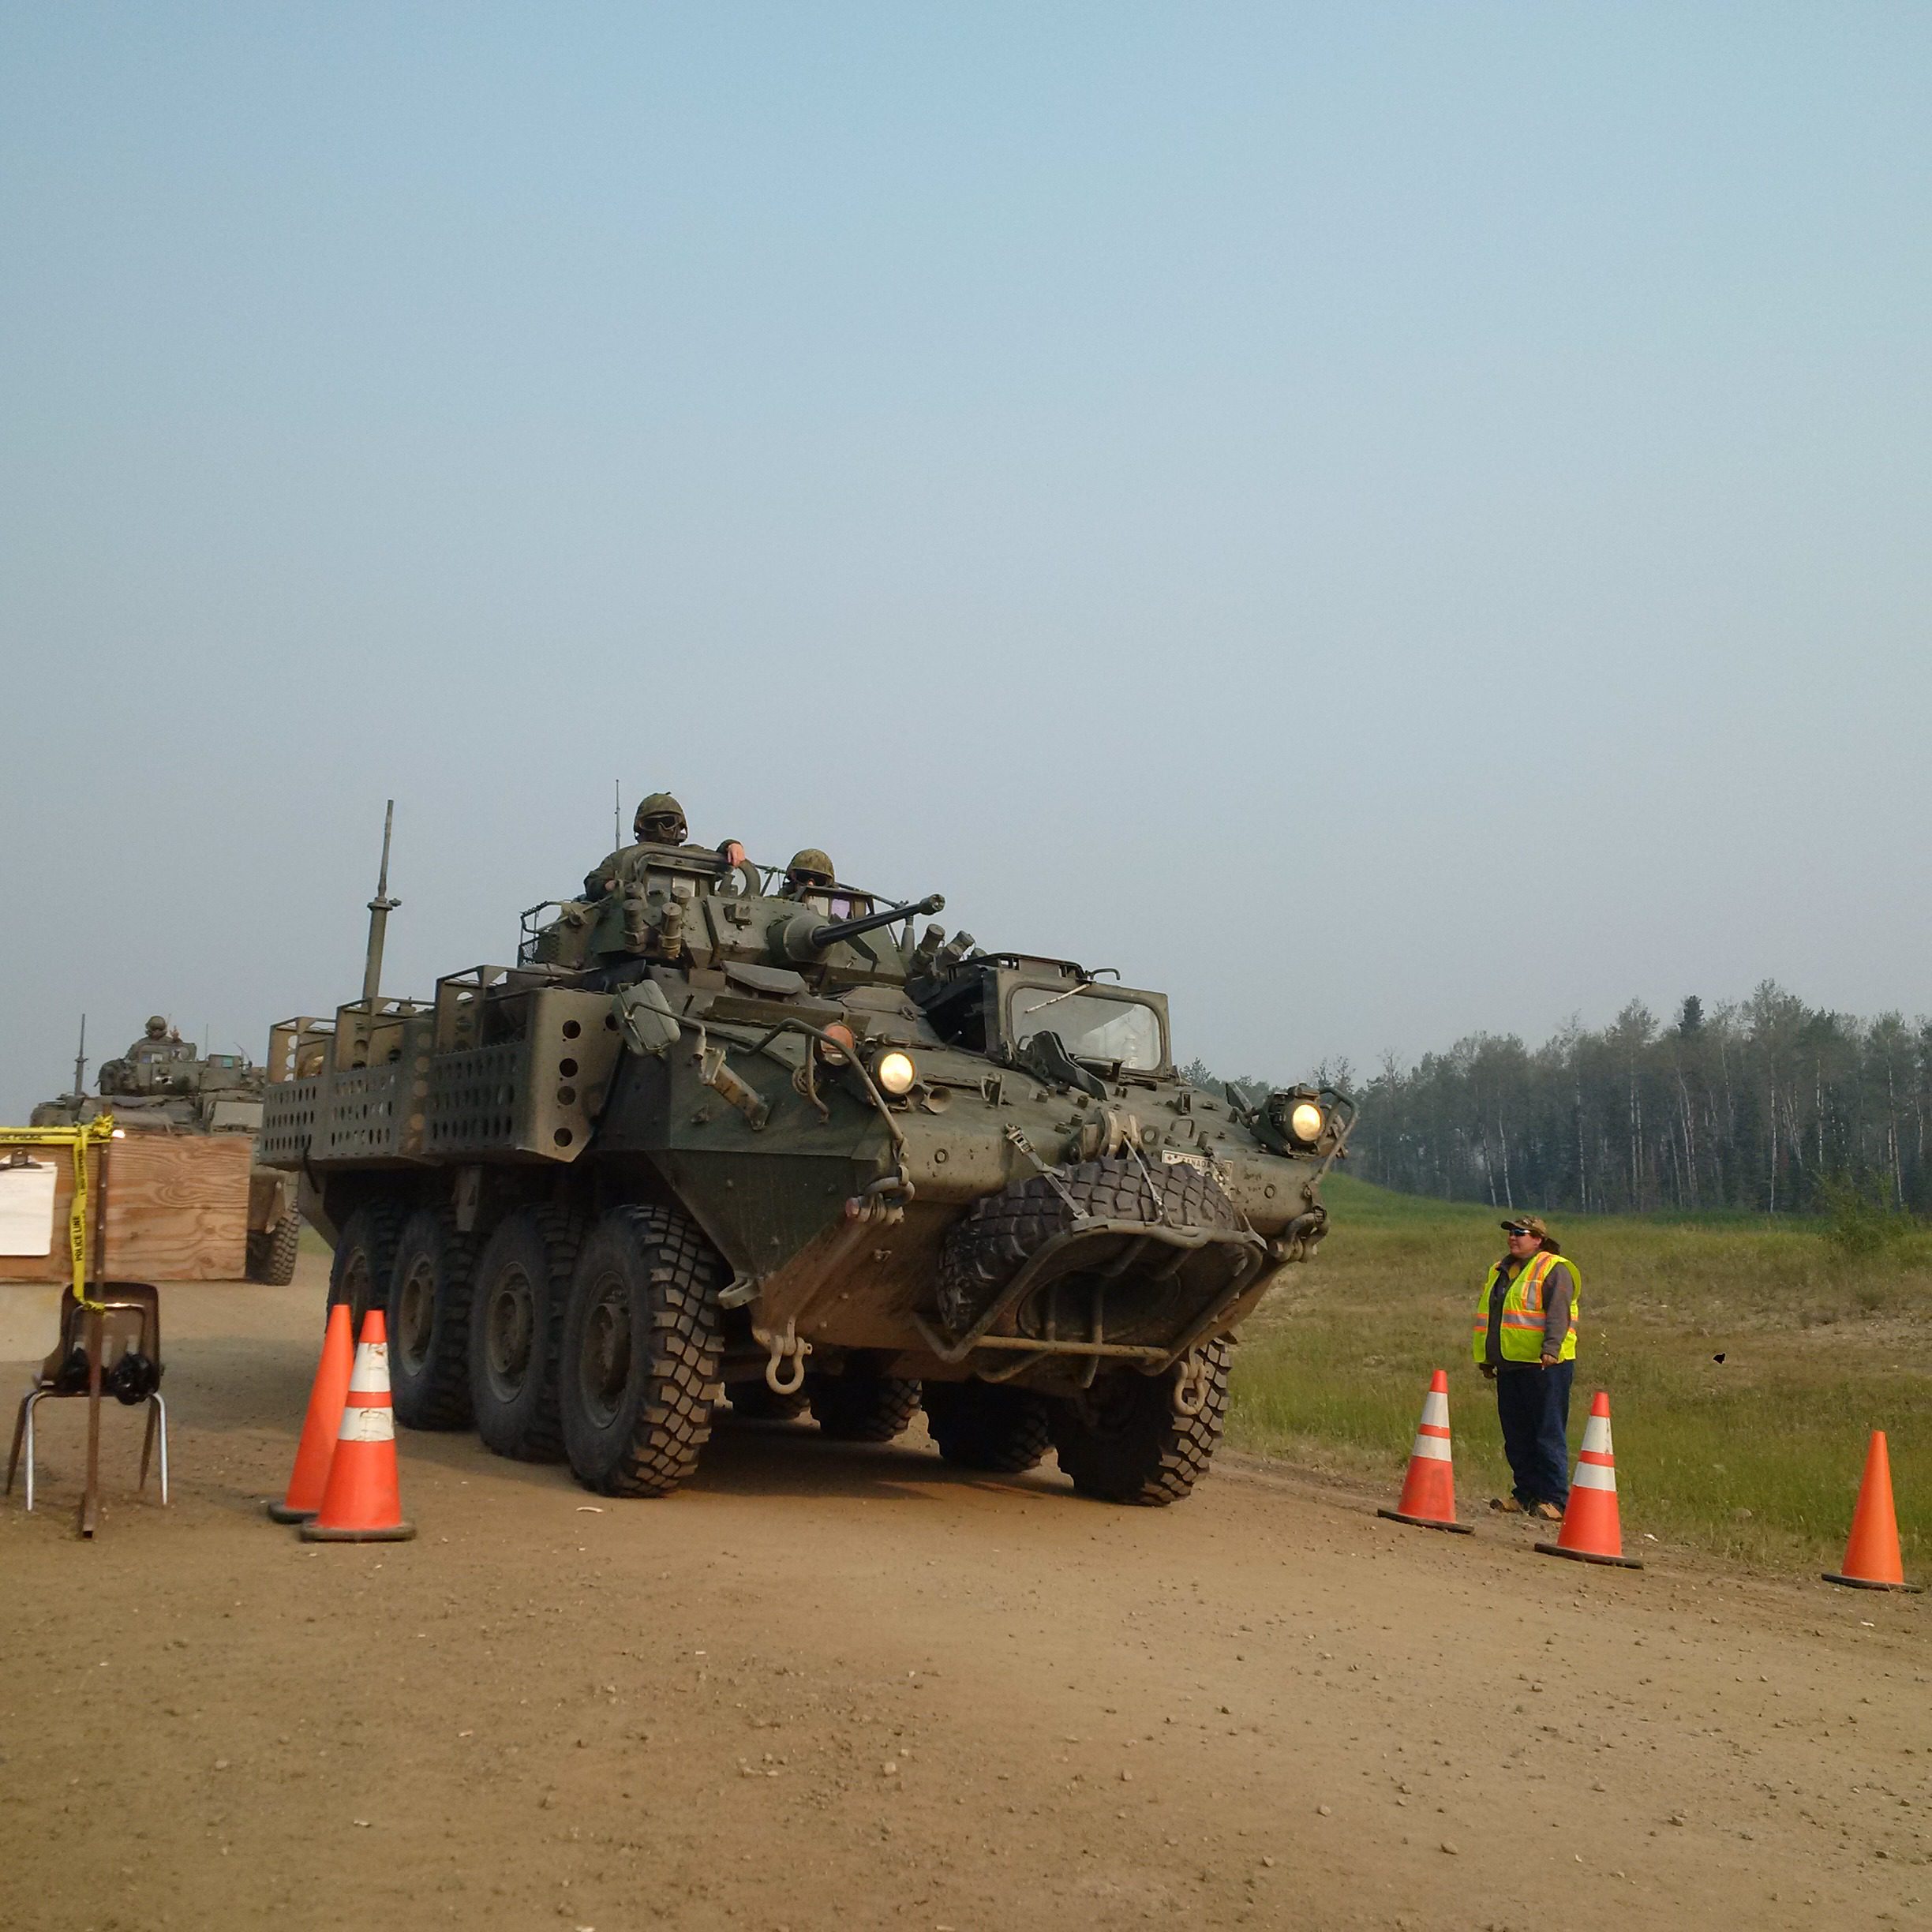 A Canadian Forces LAV rolls into Montreal Lake to continue battling flames. (APTN/Photo)